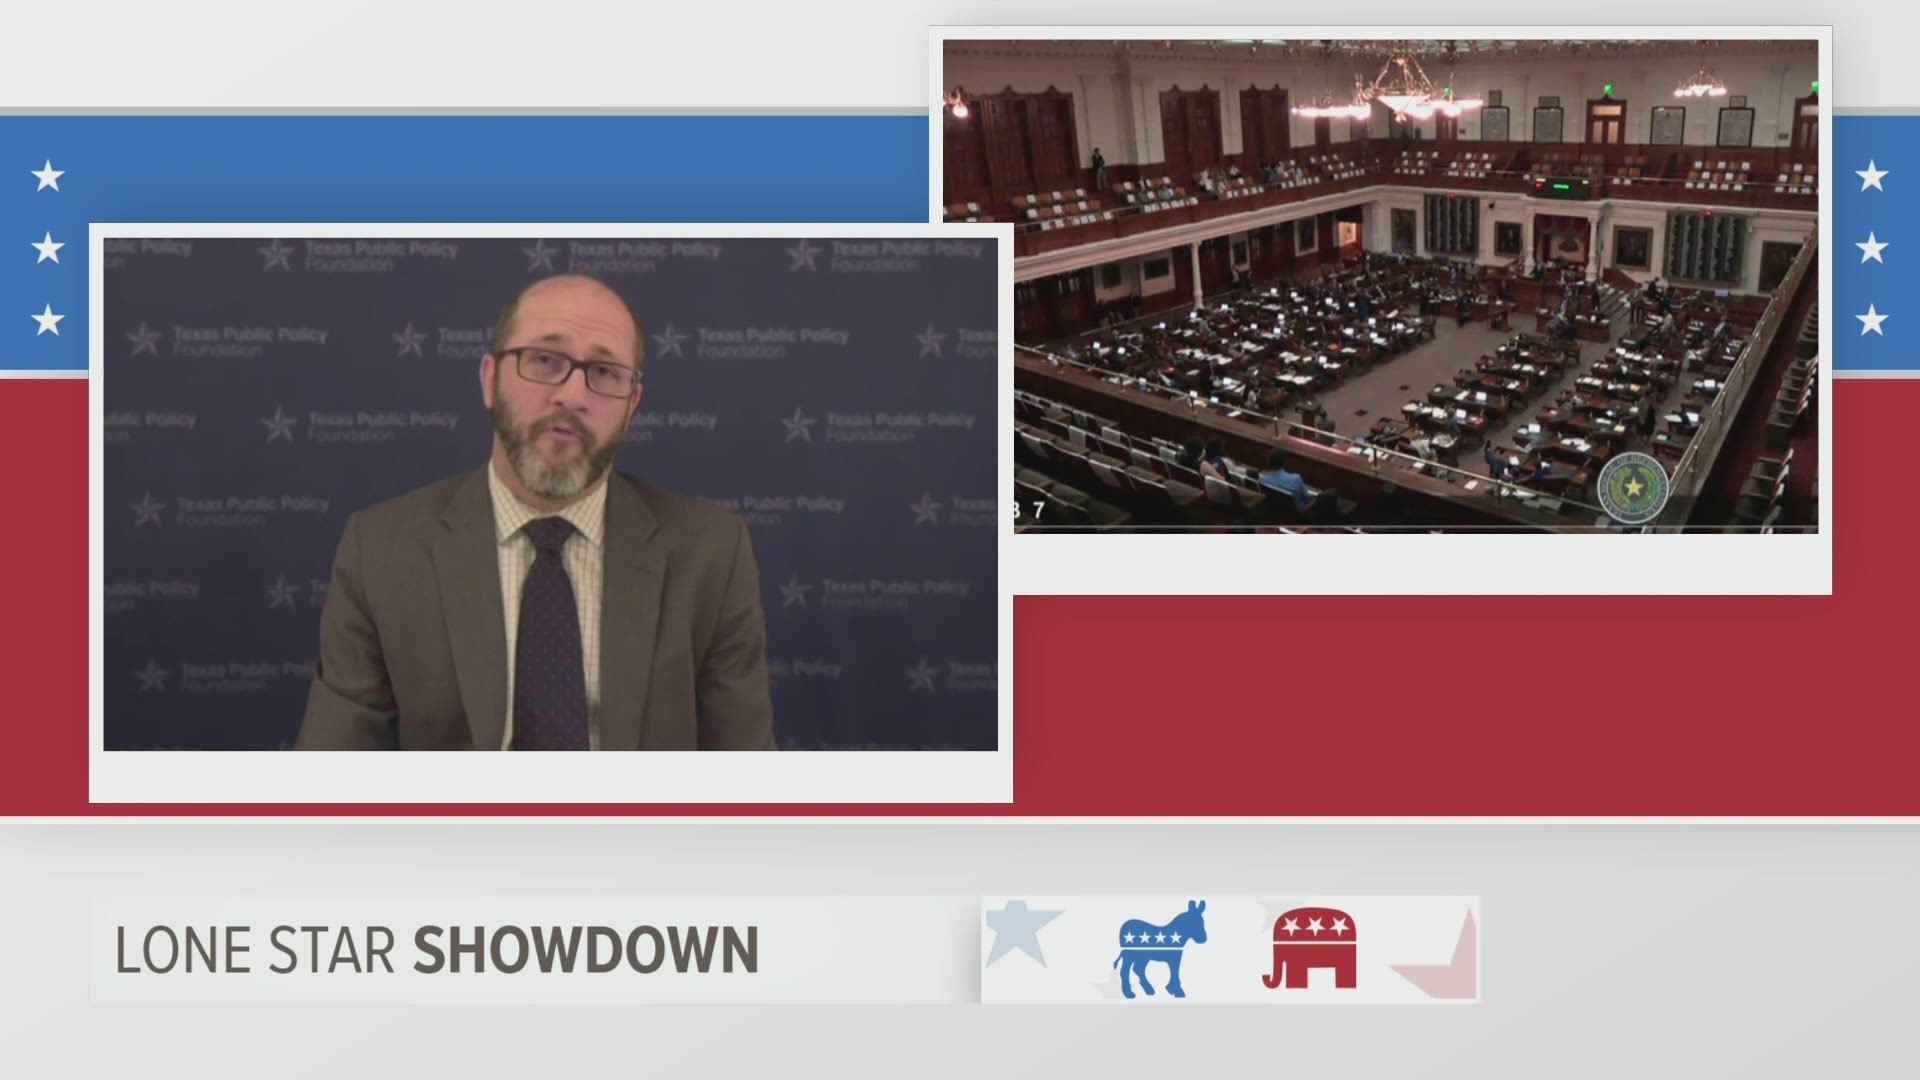 Ennis, a senior fellow with the Texas Public Policy Foundation, discusses the elements of the elections bill on which Democrats prevented a vote by flying to DC